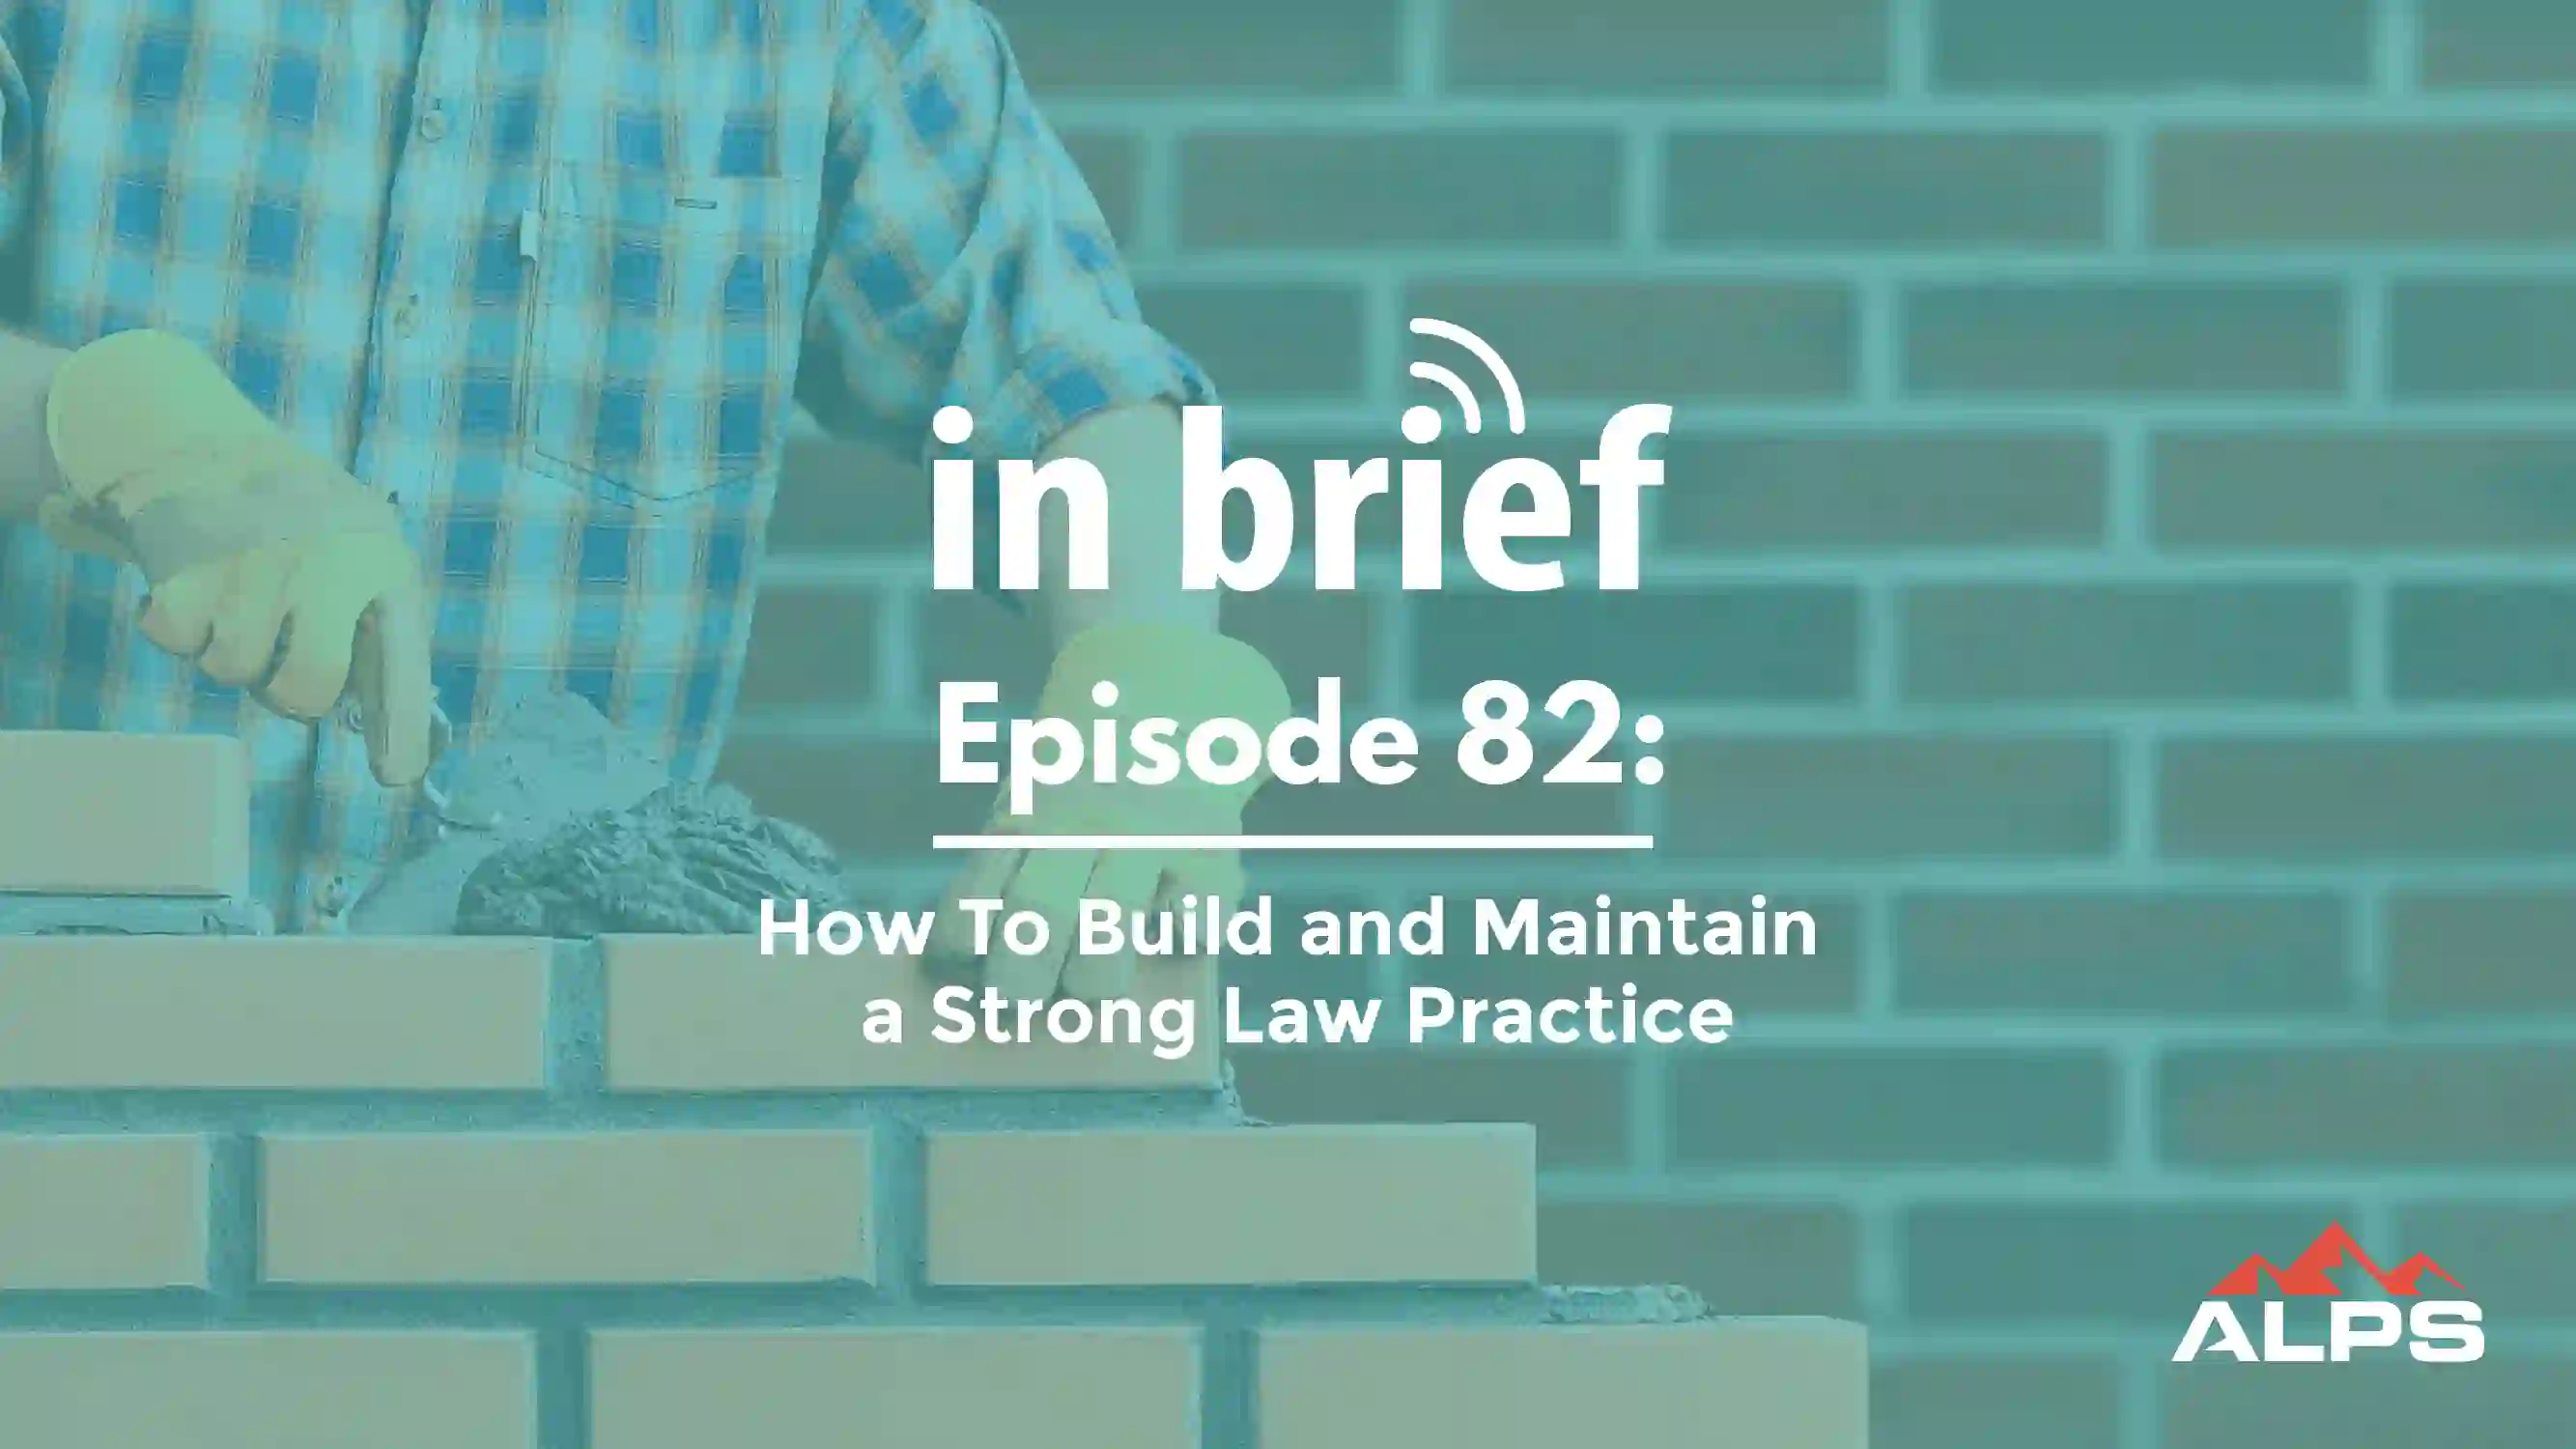 ALPS In Brief - Episode 82: How to Build and Maintain a Strong Legal Practice